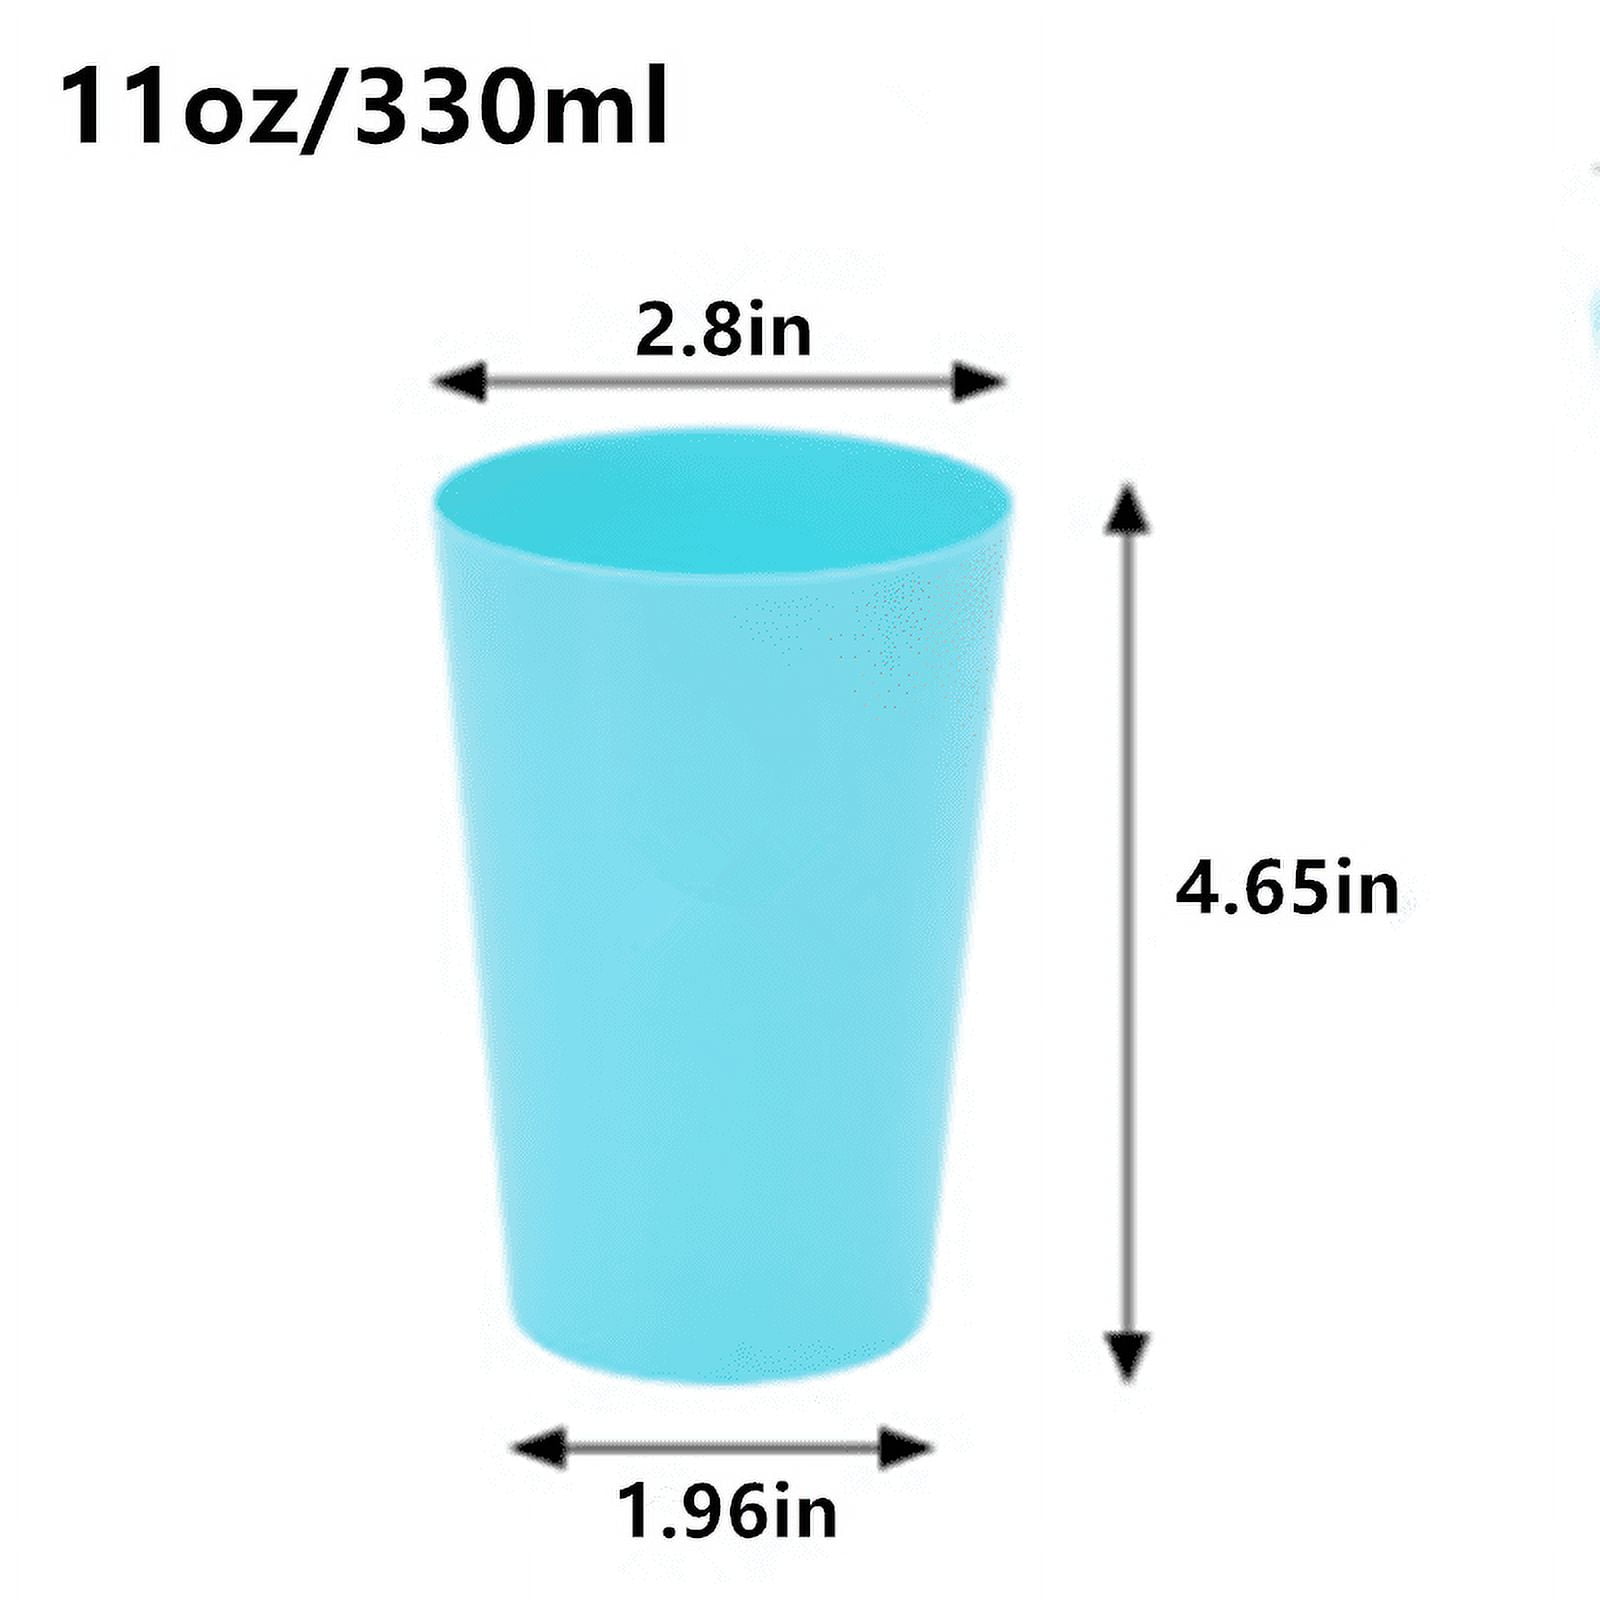 Chainplus Plastic Tumblers Set of 12 Plastic Drinking Cup 13.5 OZ in 6  Colors Plastic Cups Dishwasher Safe Tumbler Cups Reusable Cups For Kitchen,  Party Unbreakable Adults Kids Cups 